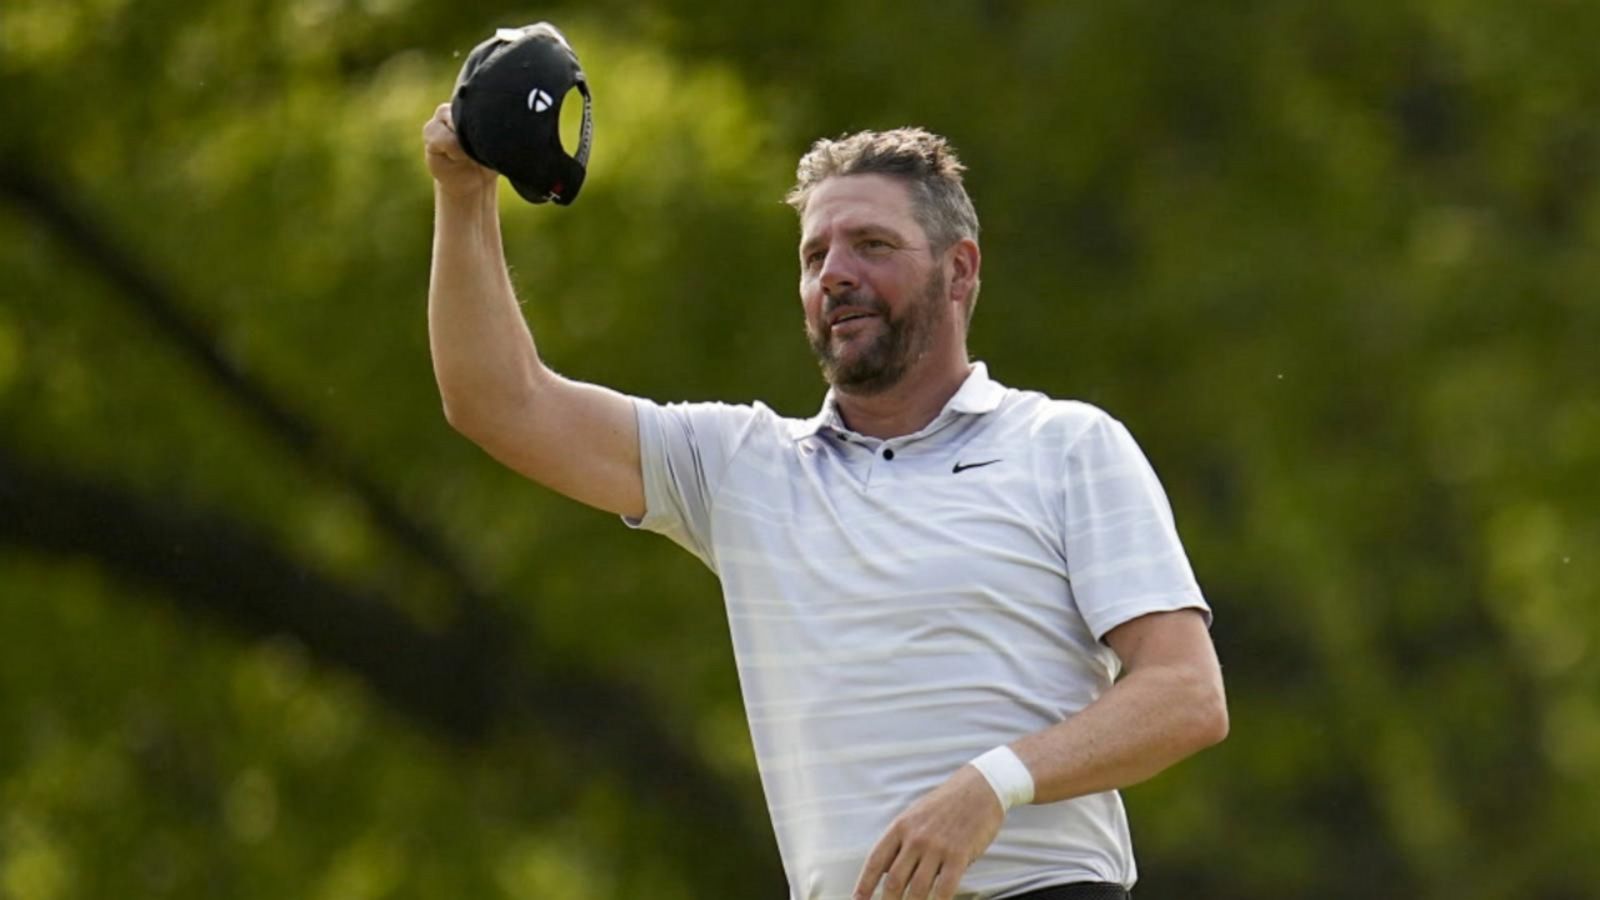 Golf pro steals the show with hole-in-one at PGA Championship - Good ...